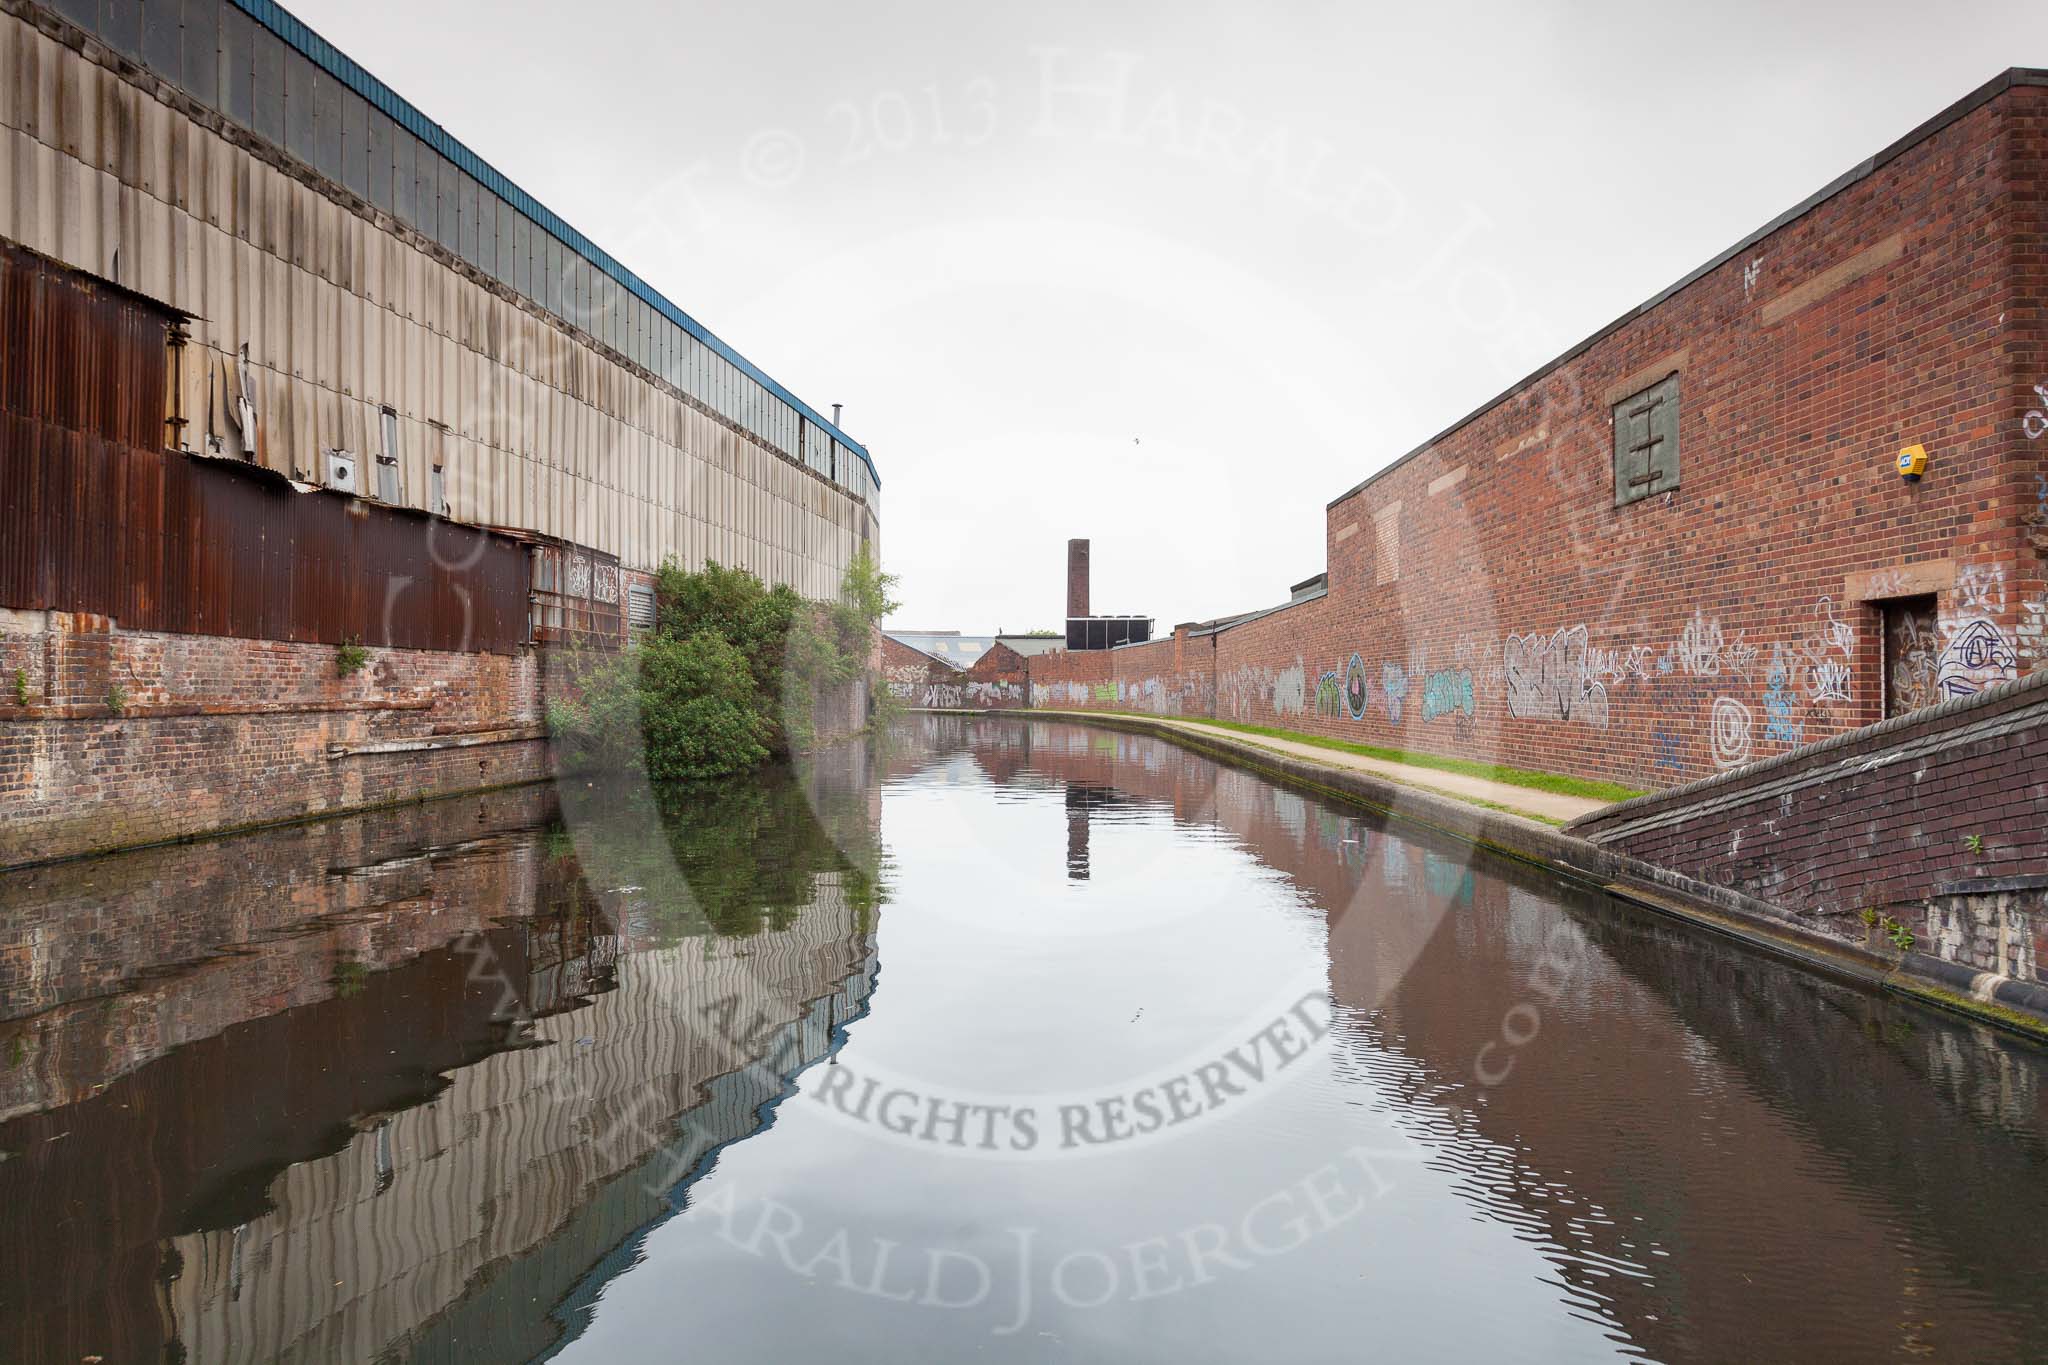 BCN 24h Marathon Challenge 2015: Old industry at the Soho Loop. In a few years or decades this will be history, and replaced by housing developments or a business park, probably with less character than the old industry.
Birmingham Canal Navigations,



on 23 May 2015 at 08:59, image #26